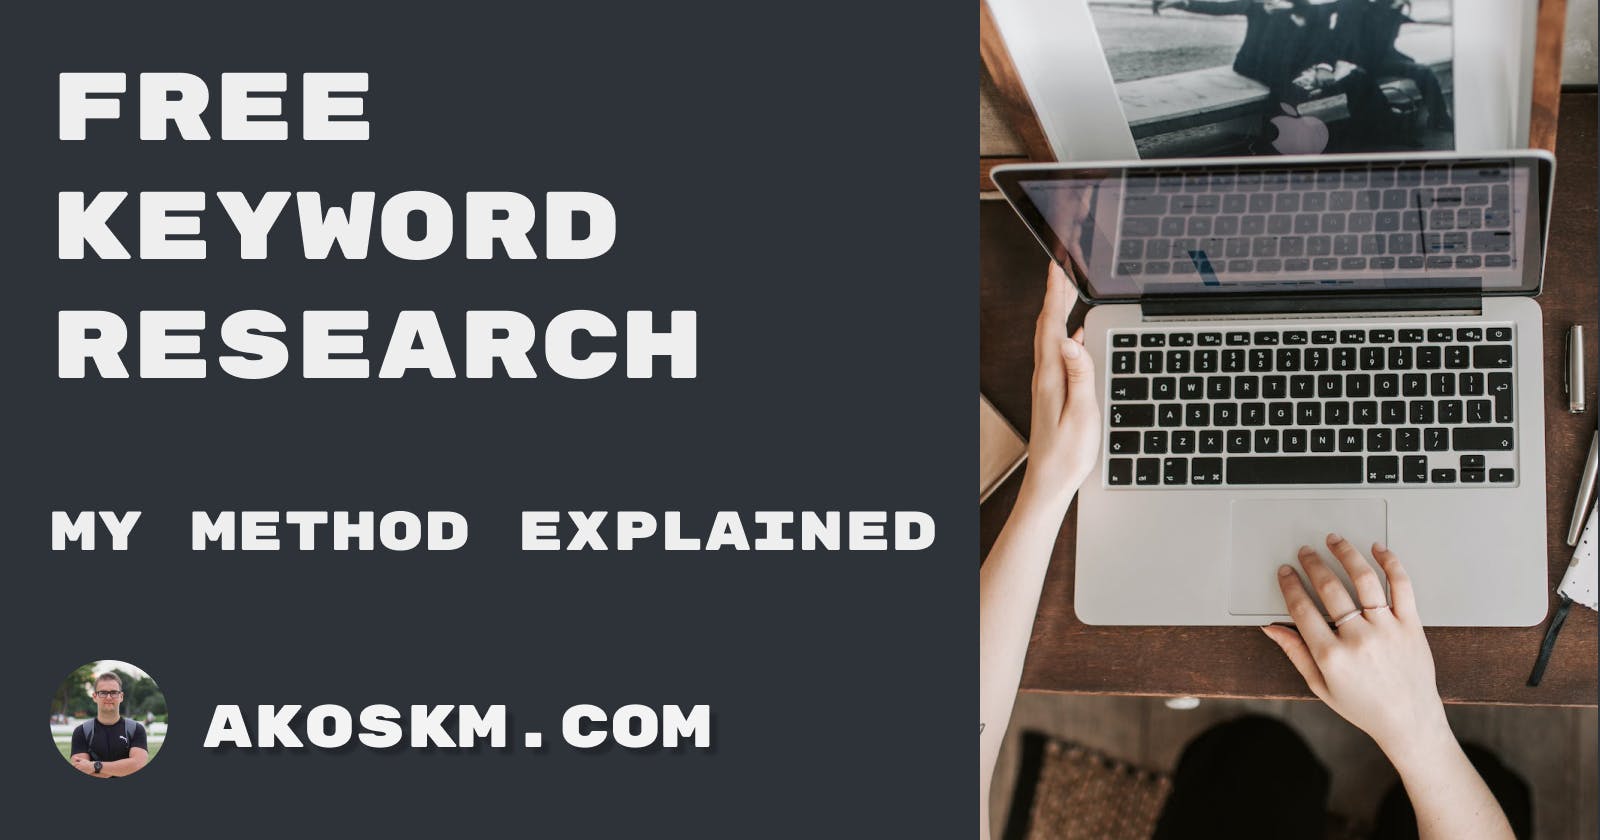 Free Keyword Research: My Method Explained